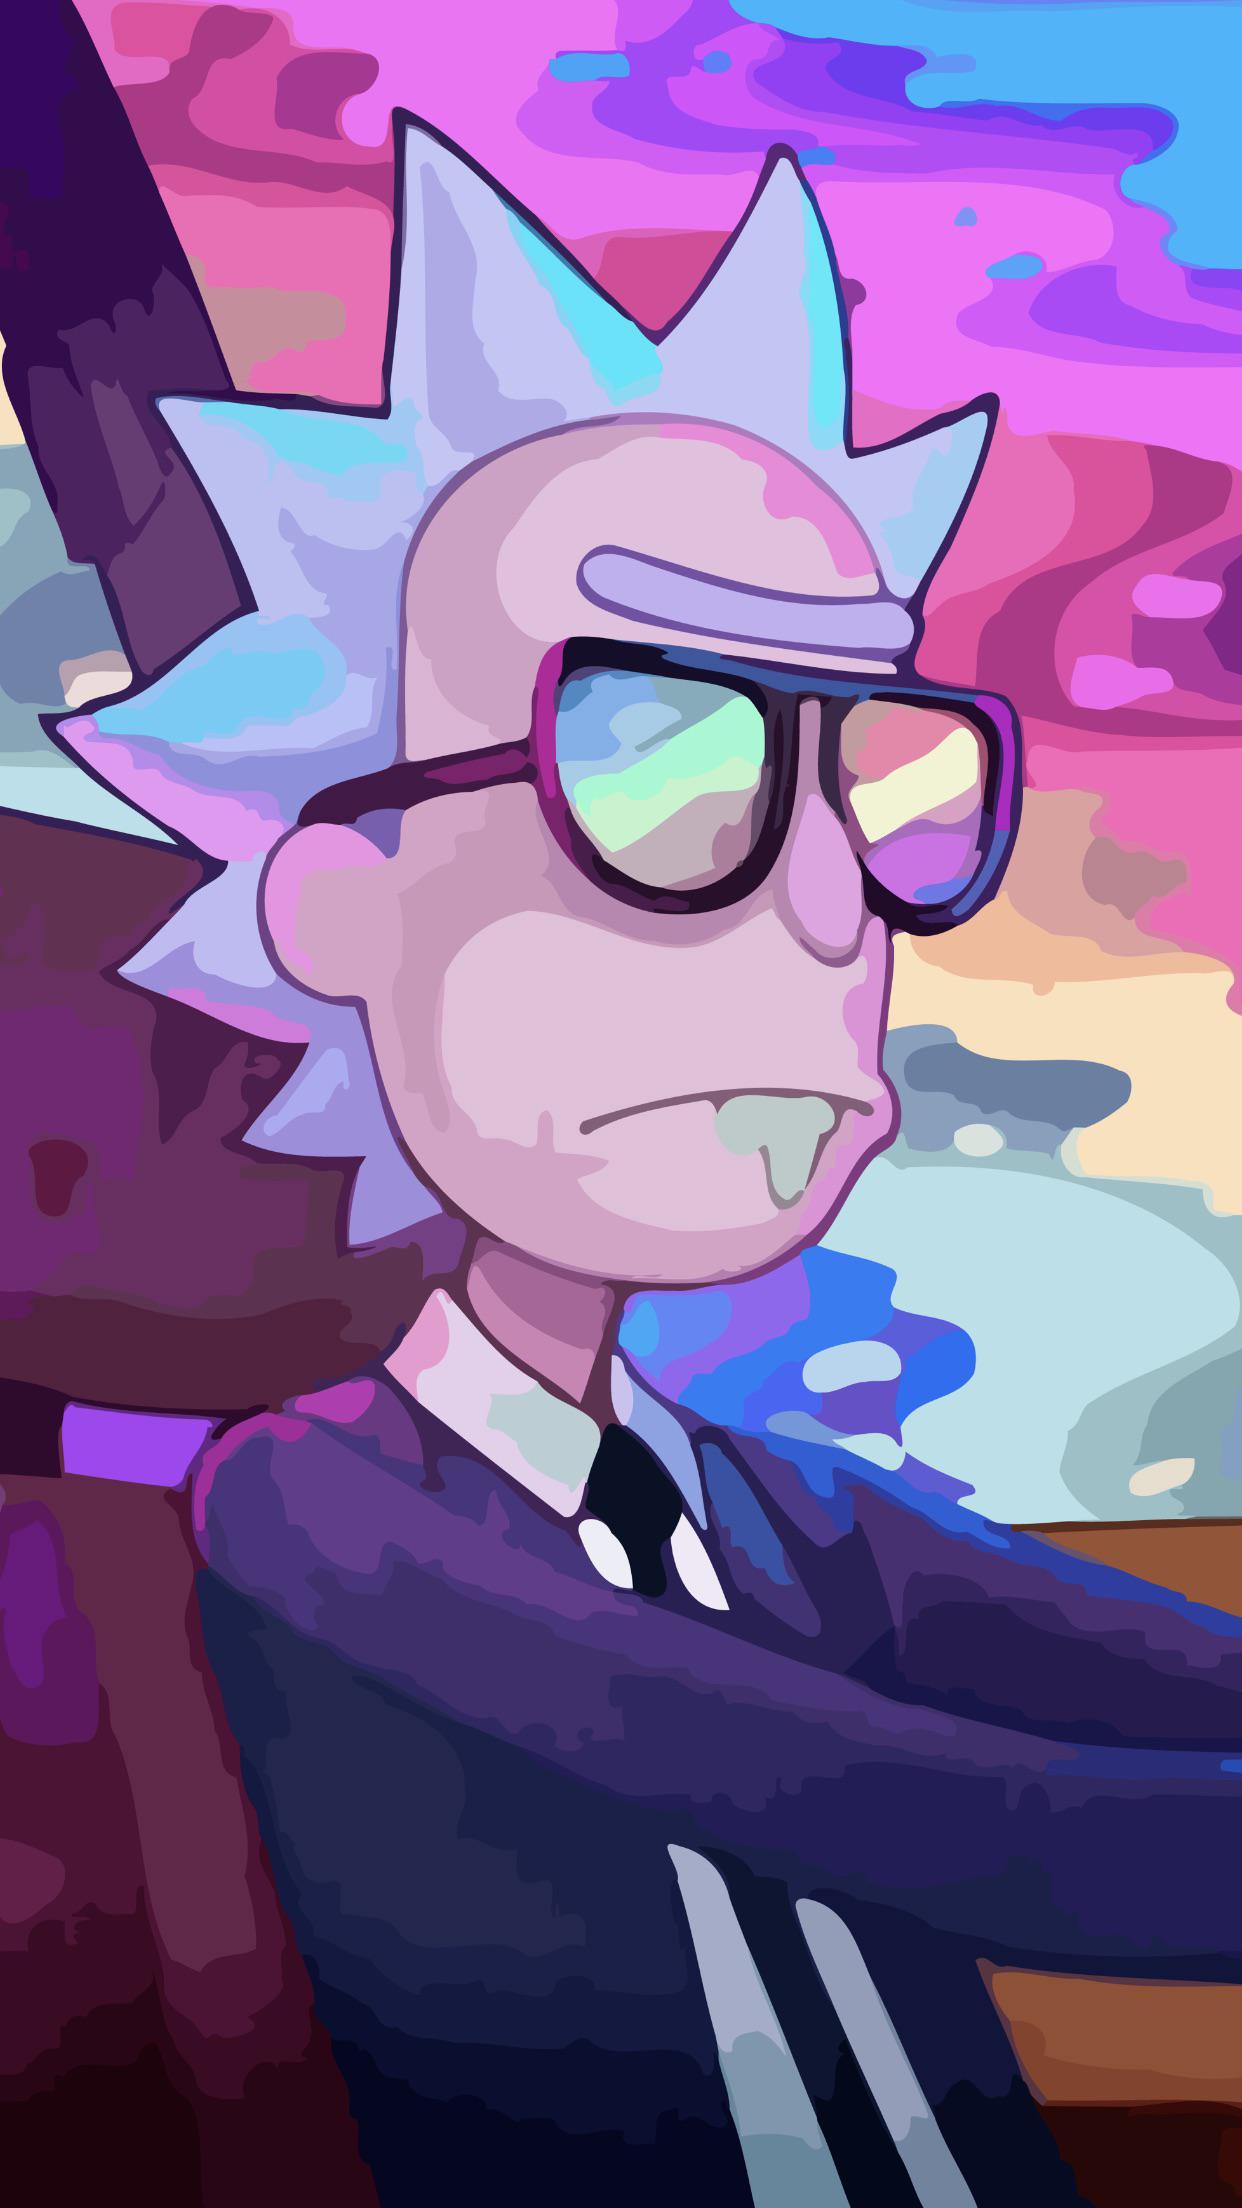 Here is a nice “TRIPPY RICK” wallpaper for mobile phones. Enjoy!: rickandmorty